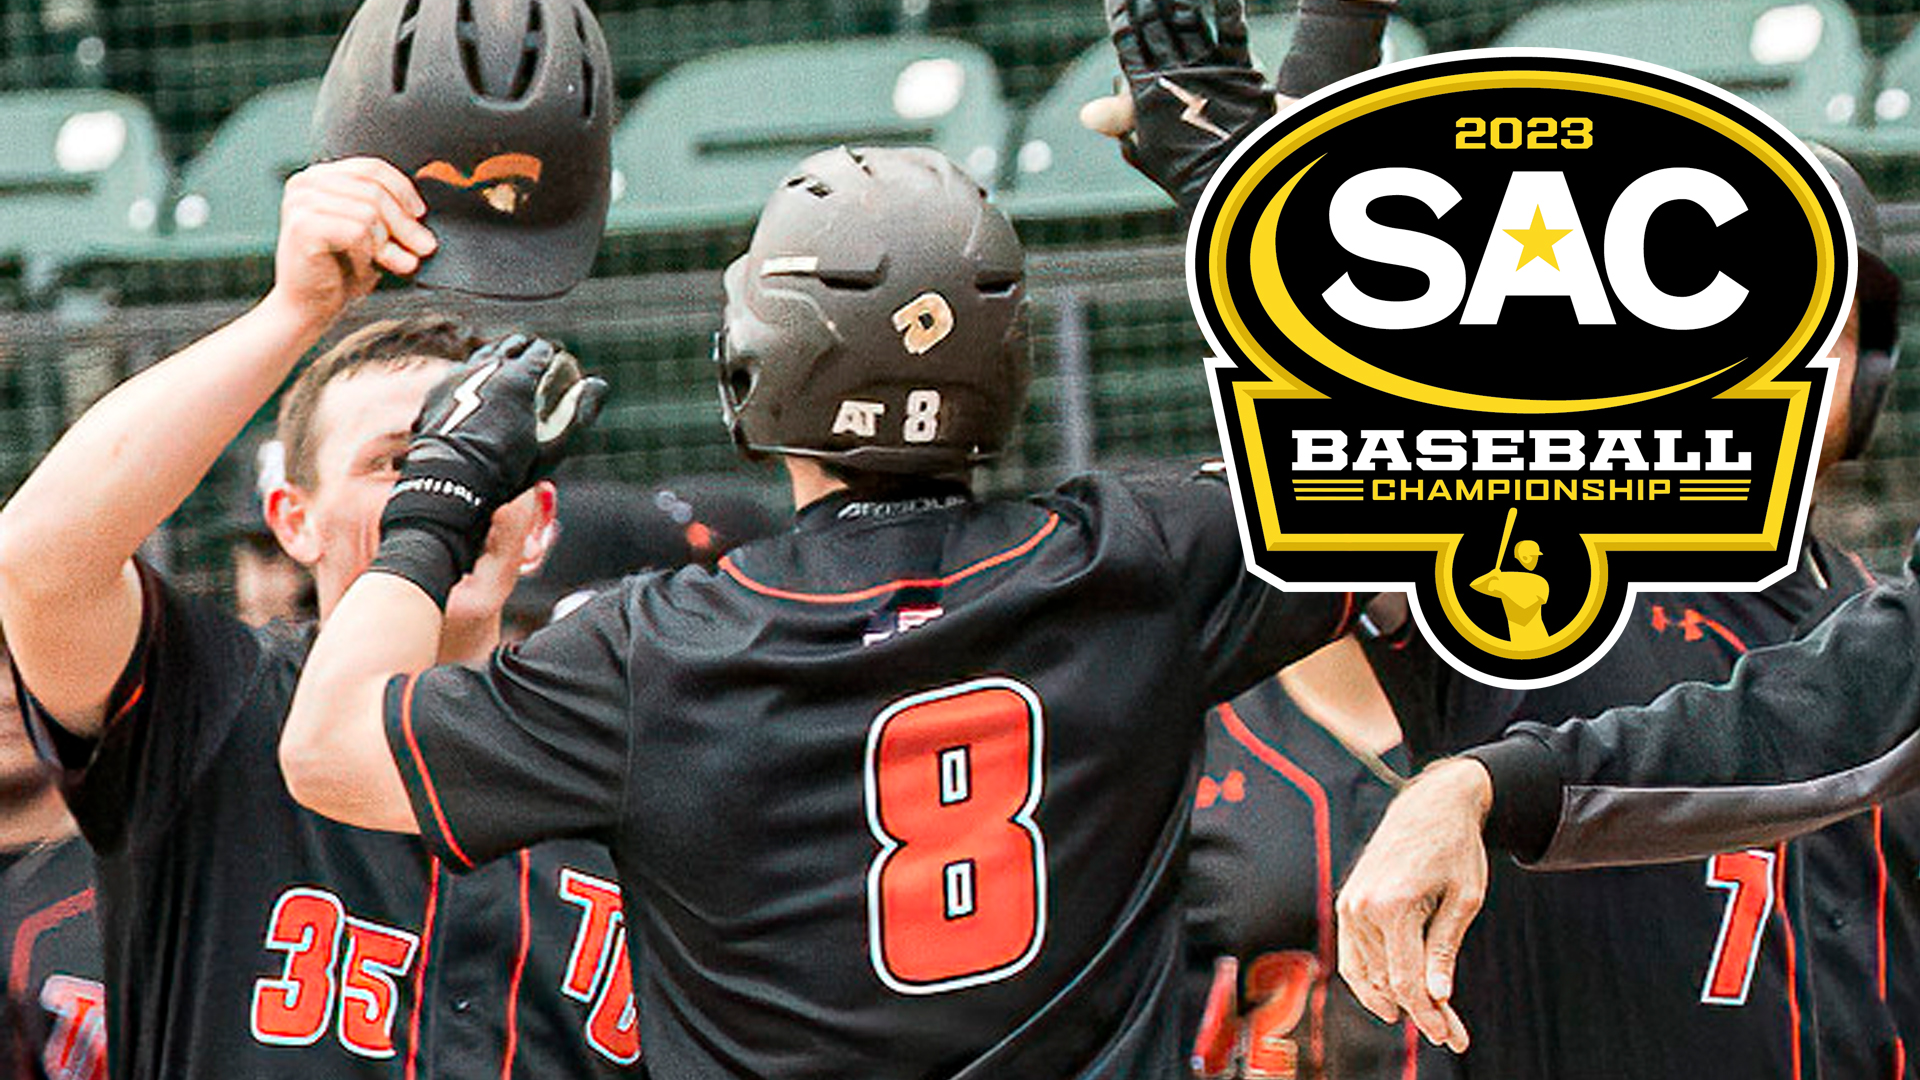 Pioneers travel to Newberry this weekend for opening round of SAC Baseball Championship